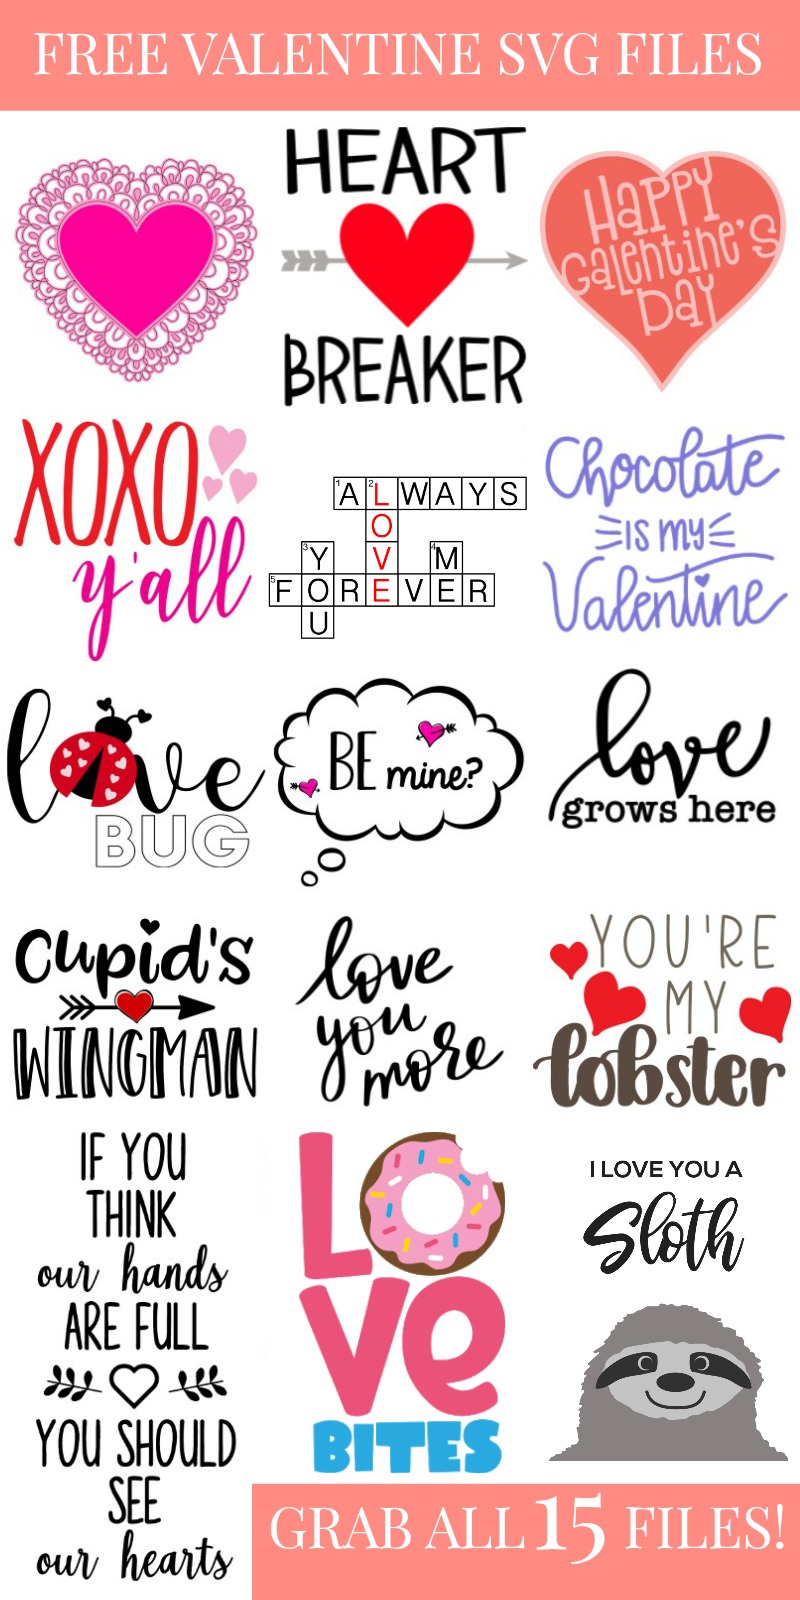 15 Free Valentine's Day SVG Files For Your Cricut or Silhouette - Hello